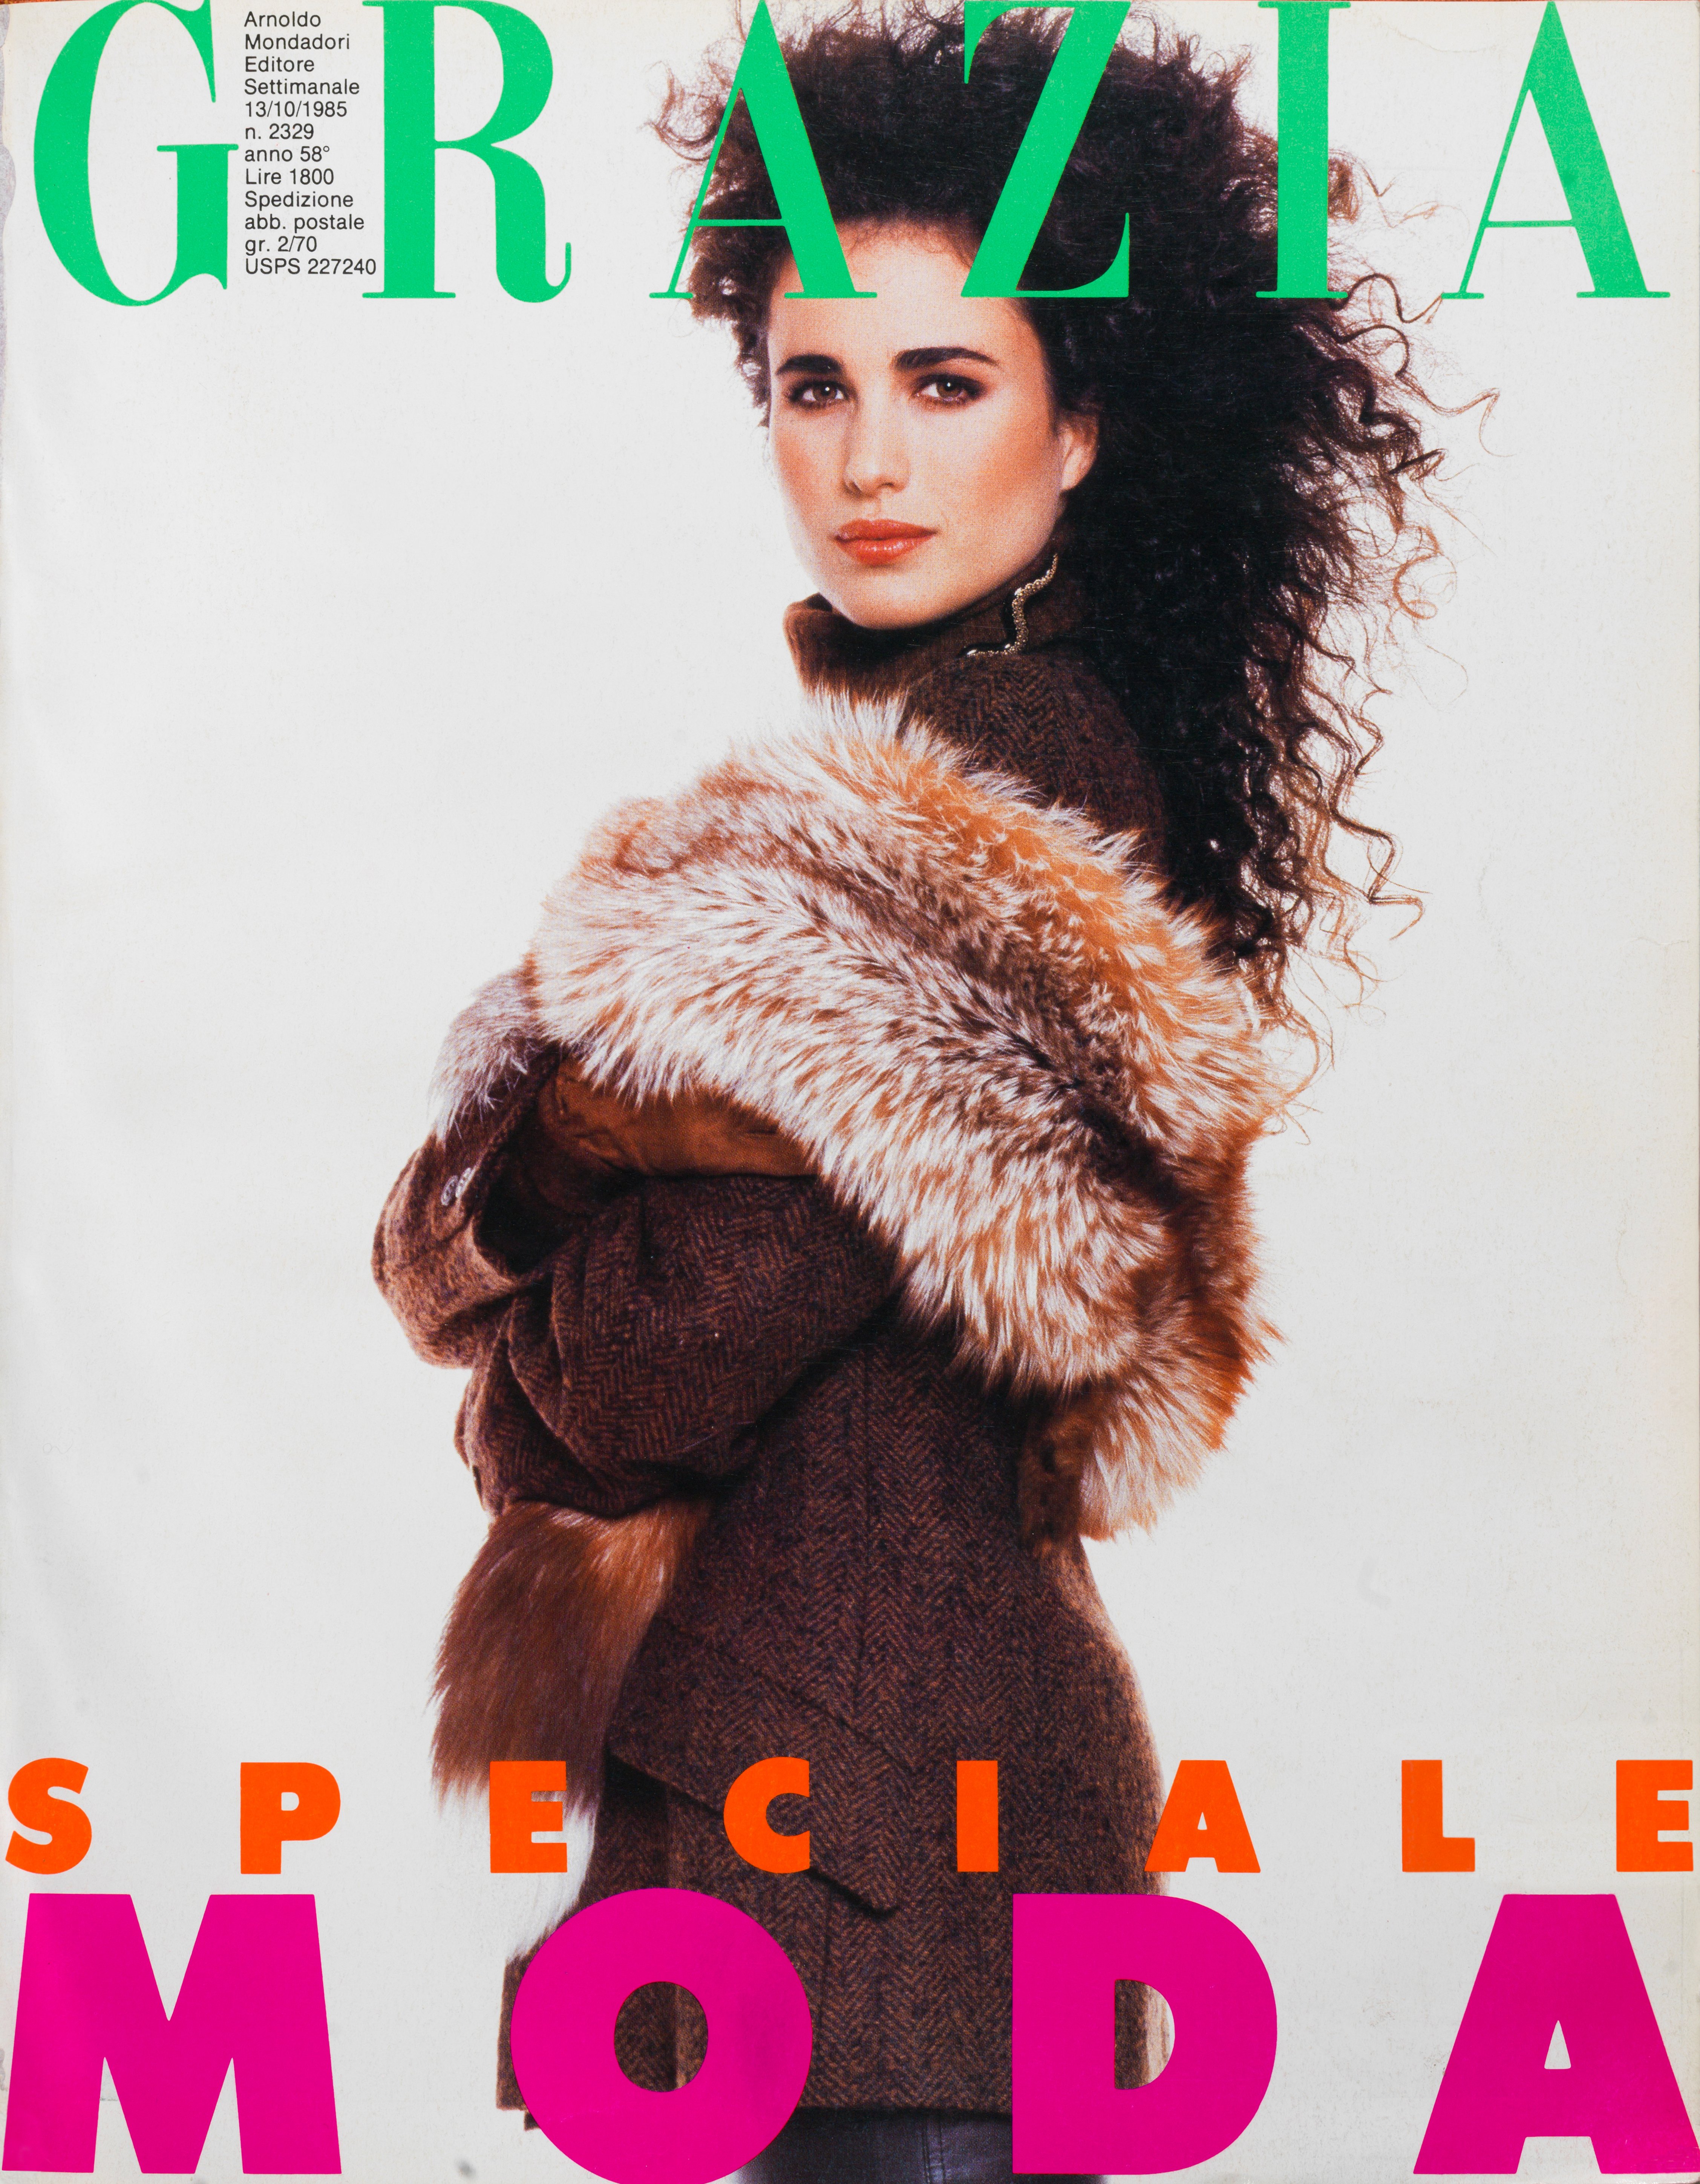 Actress Andie MacDowell gracing the cover of Grazia magazine wearing winter clothes in 1985. | Source: Getty Images